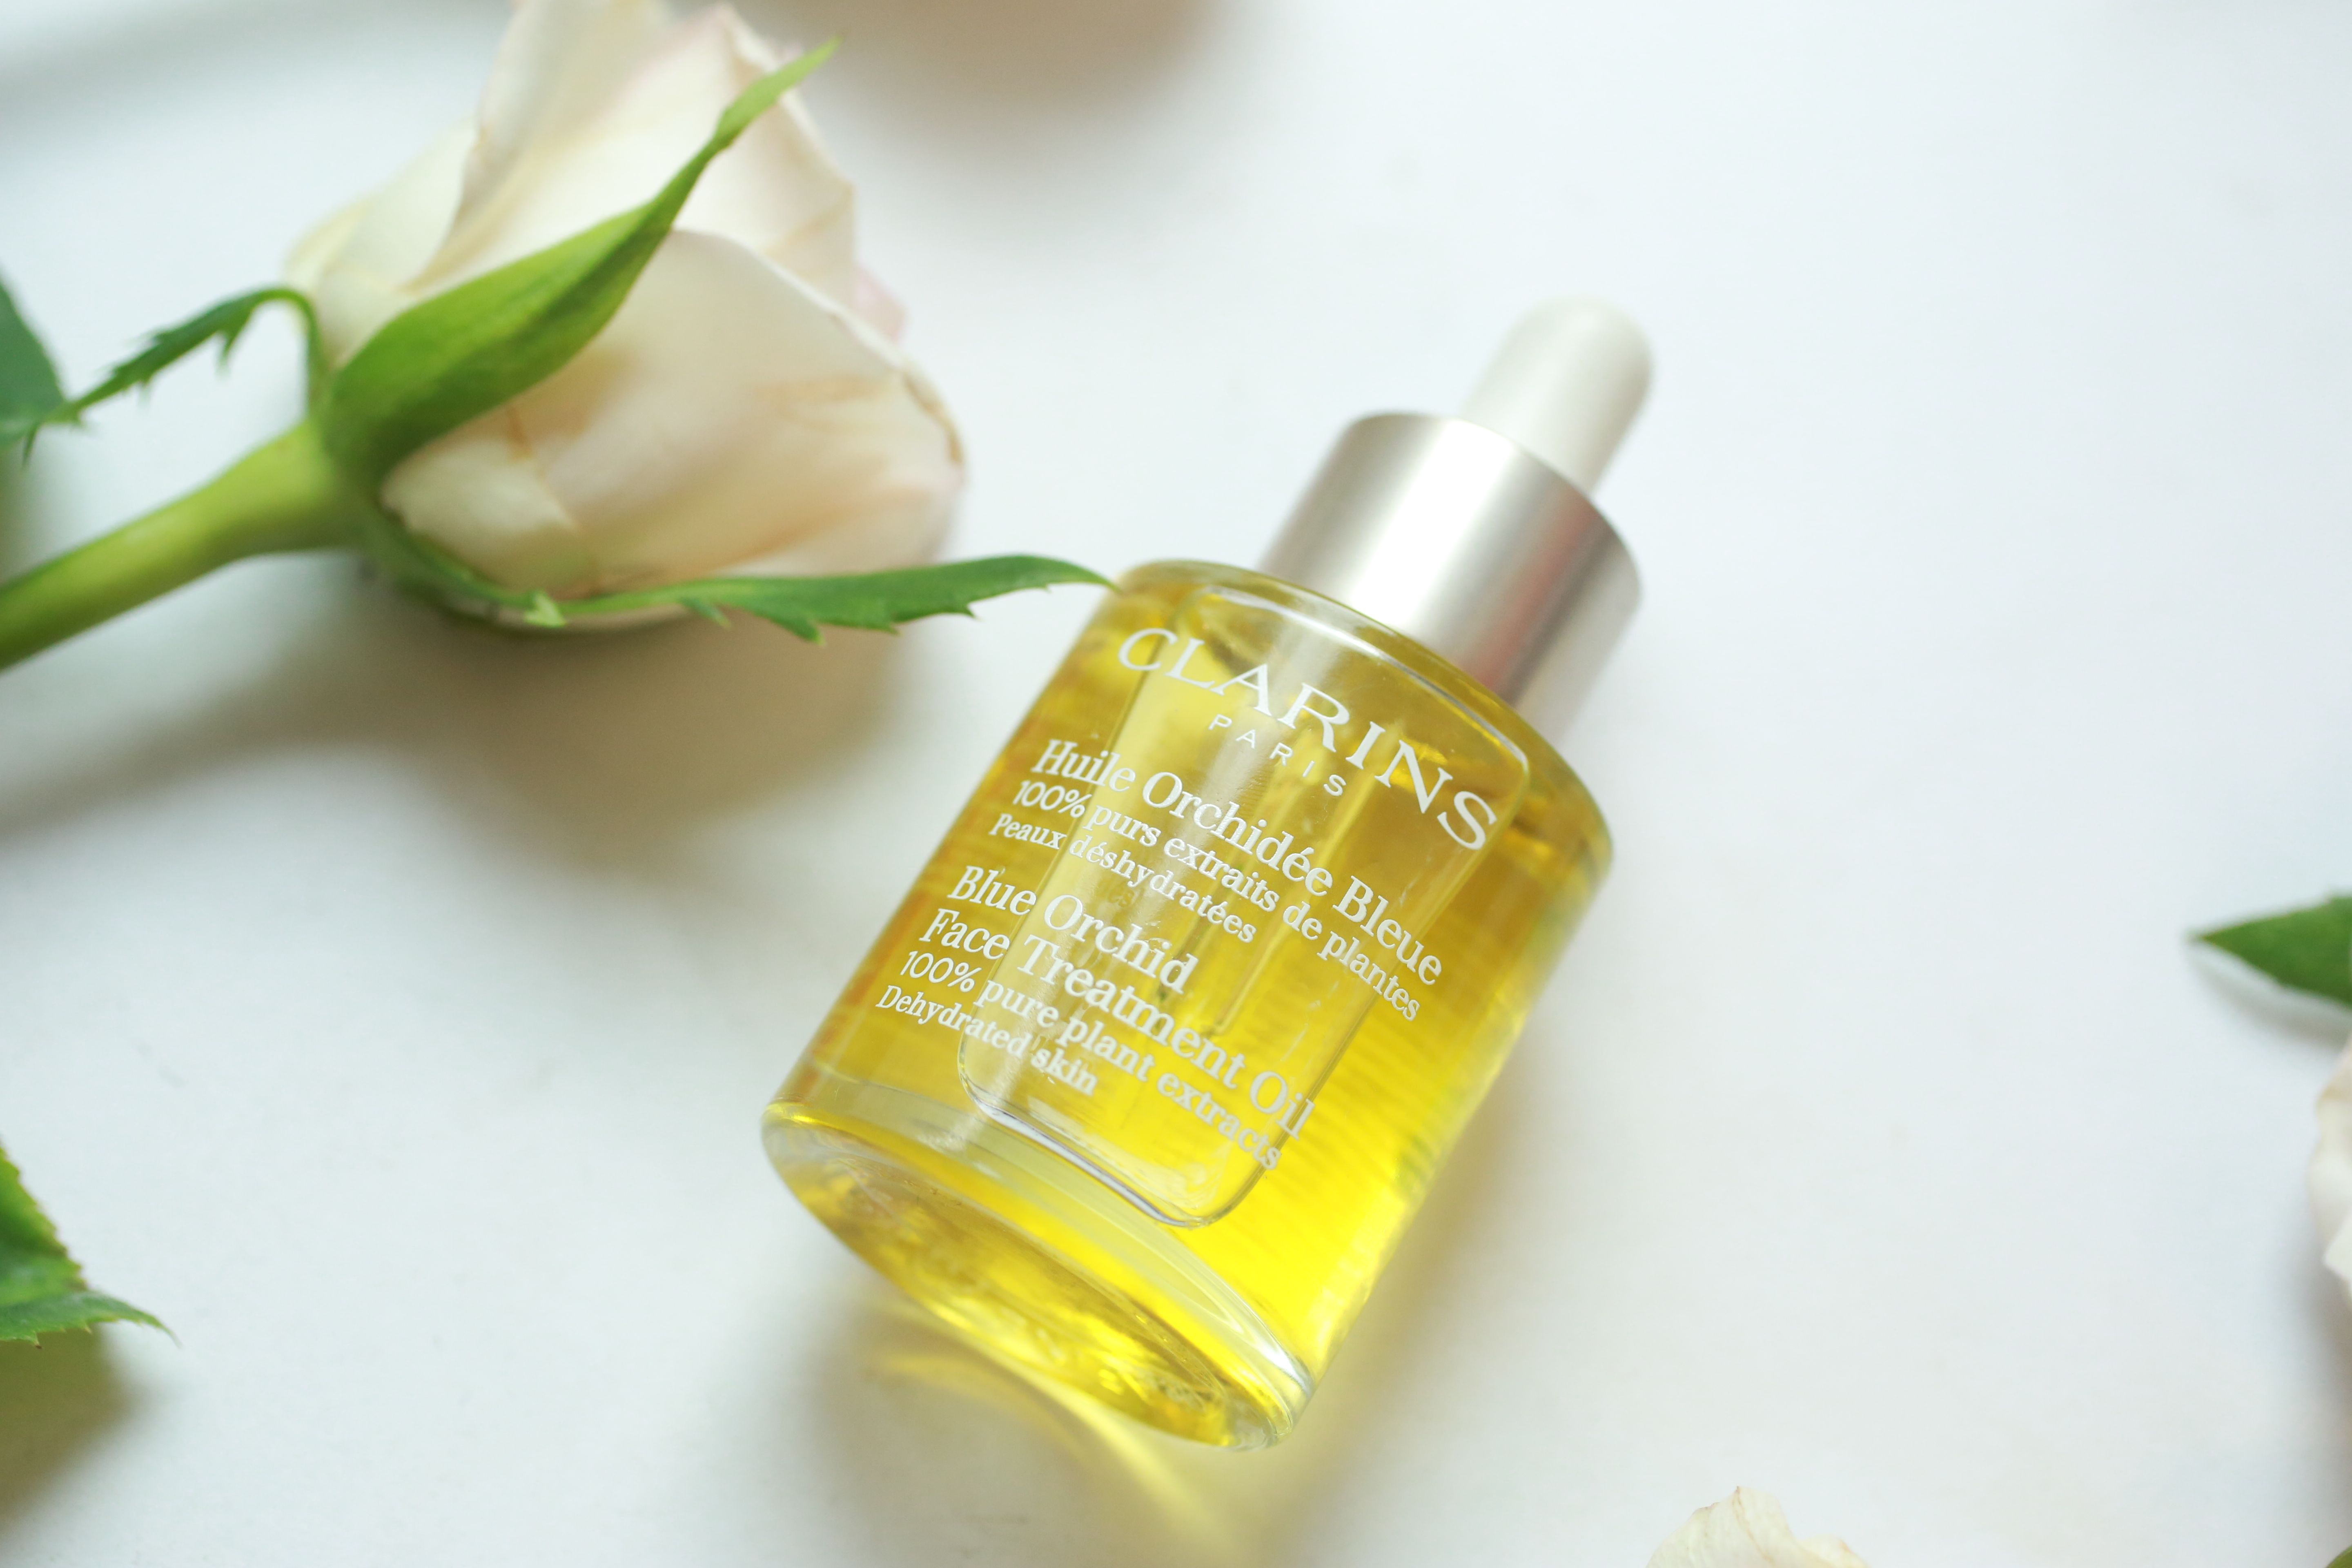 clarins-blue-orchid-face-treatment-oil-review.